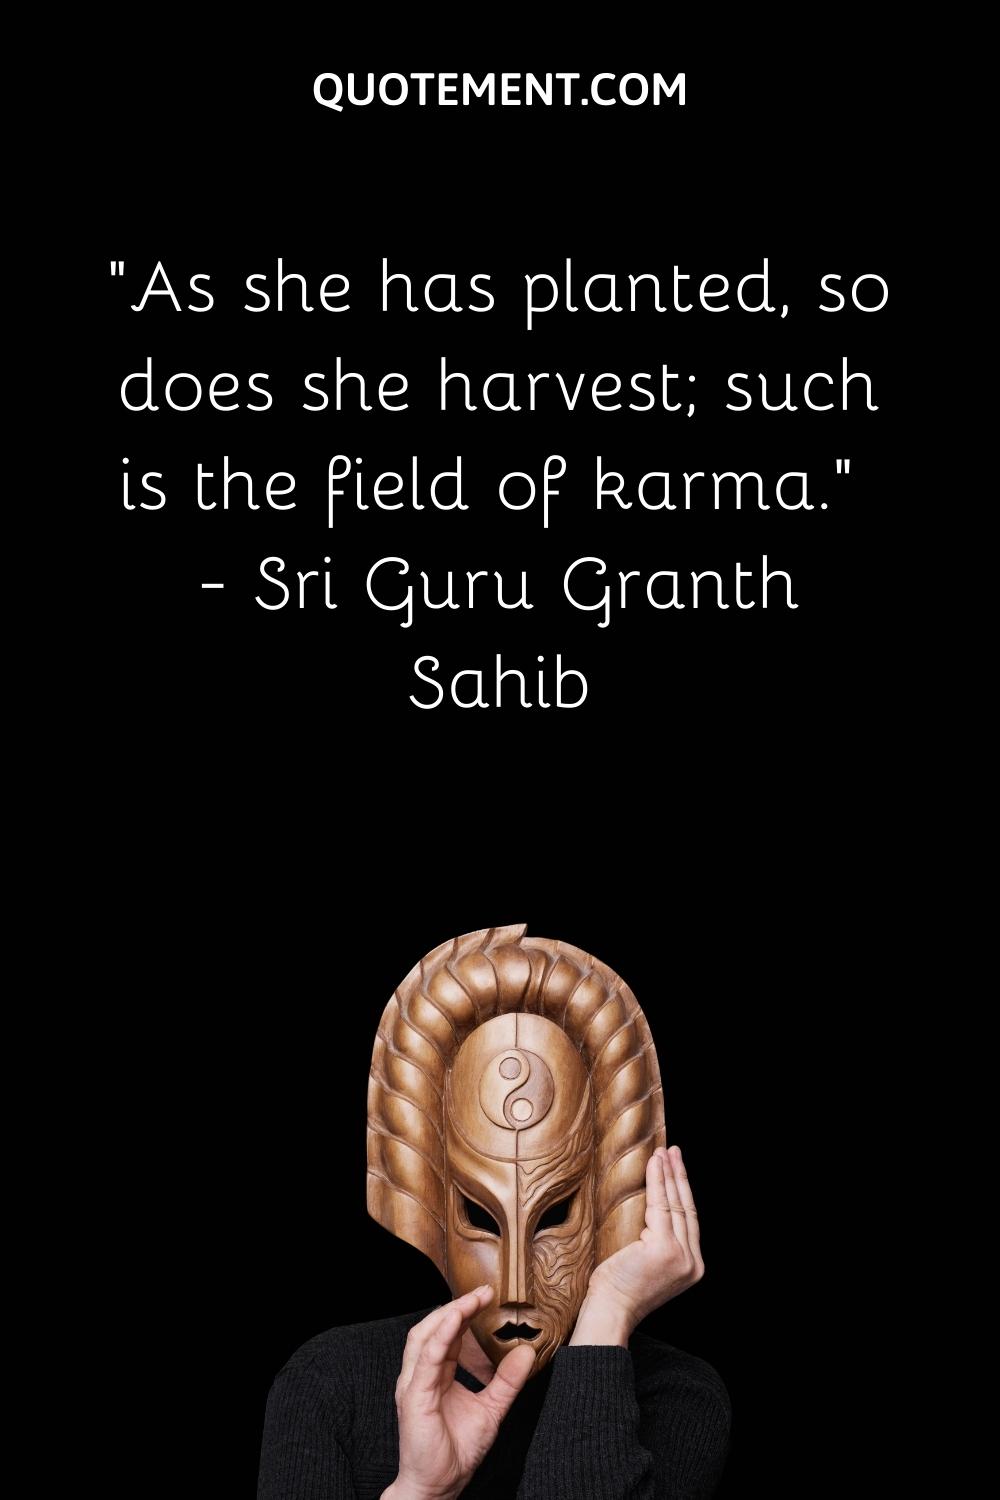 As she has planted, so does she harvest; such is the field of karma